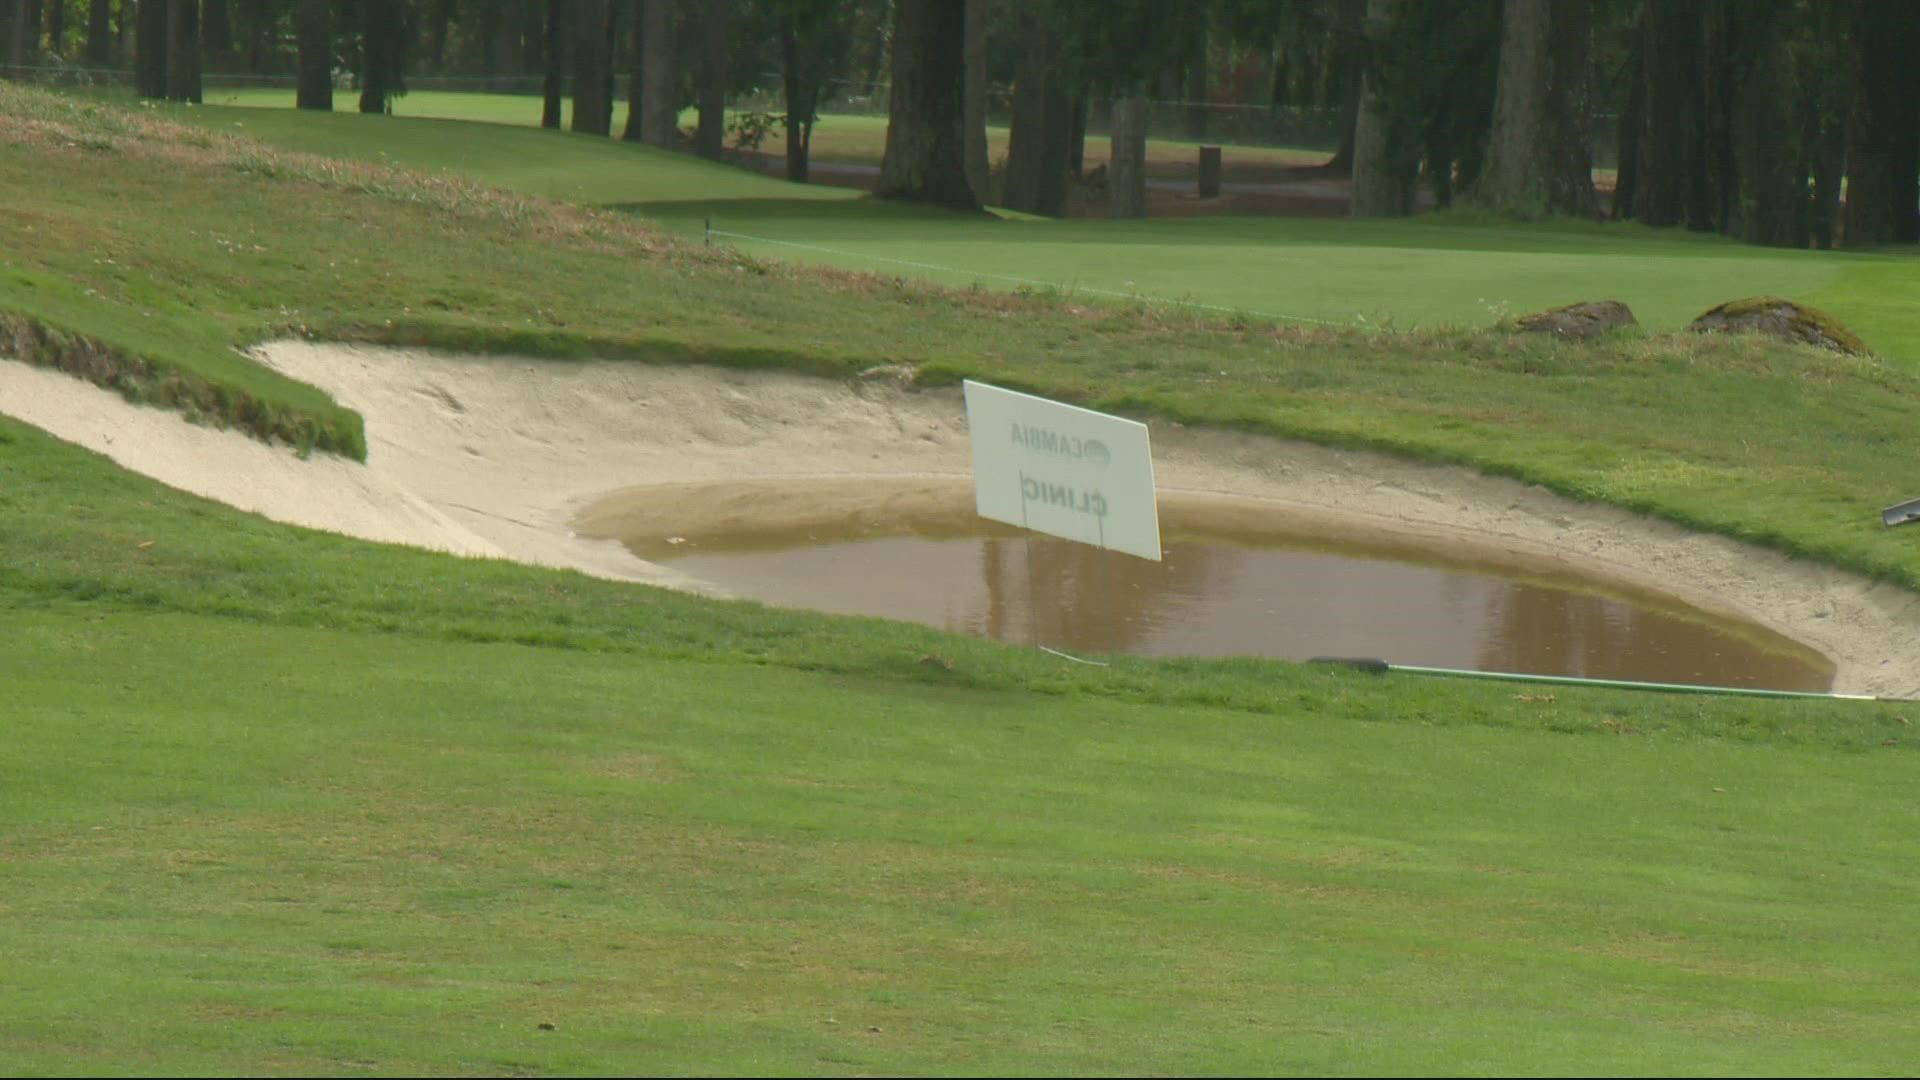 Wind and rain made for dangerous conditions at the Oregon Golf Club.